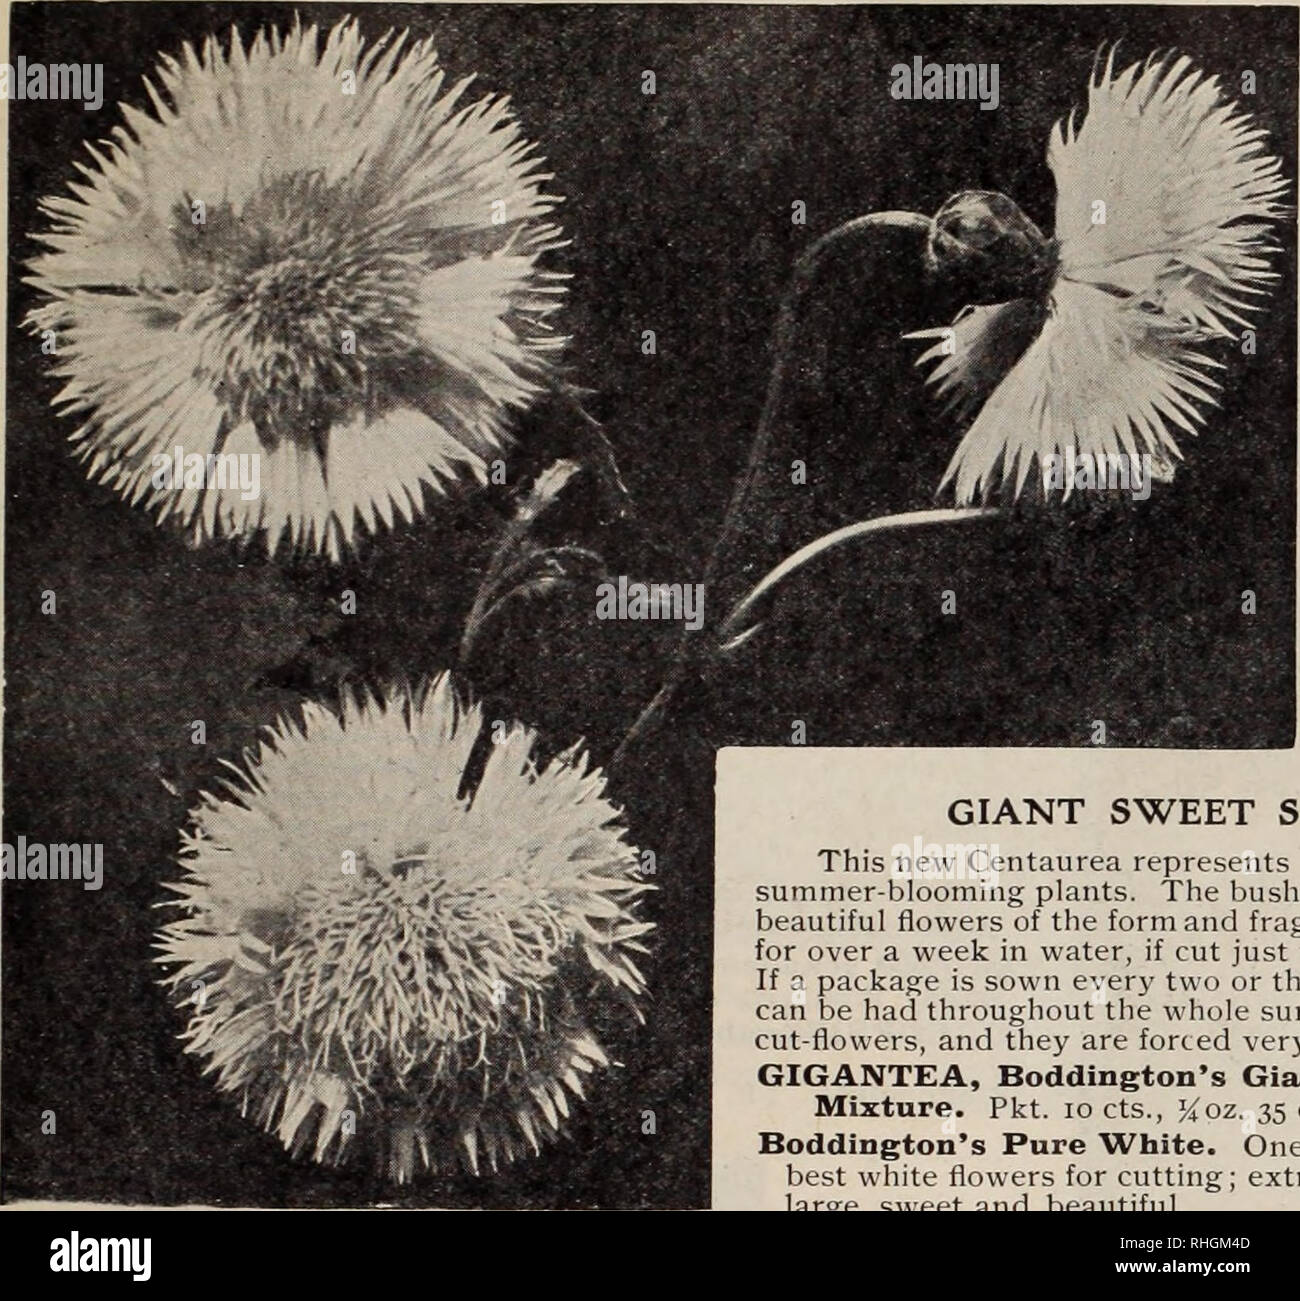 . Boddington's quality bulbs, seeds and plants / Arthur T. Boddington.. Nursery Catalogue. BODDINGTON'S ^^A^OjEcVy SEEDS 27. Centaurea (h.h.p. and h.a.) Candidissima( Dusty Miller). 1 ft. For Pkt. Oz. borders or edgings.. 1,000 seeds, 75c. .$0 20 Gymnocarpa. Tallerthan the above... 10 $080 Odorata Chameleon. Yellow and rose ; very fragrant 10 2 00 Margaritae. iKft. Flowers 2K inches across, of the purest white and delight- fully scented. A garden treasure 10 i 00 Suaveolens (Yellow Sweet Sultan) 05 60 Montana, Blue. H.P. 2ft. Summer.. 05 &quot; alba. H.P. 2ft. White.... 10 CYANUS (Blue Cornflo Stock Photo